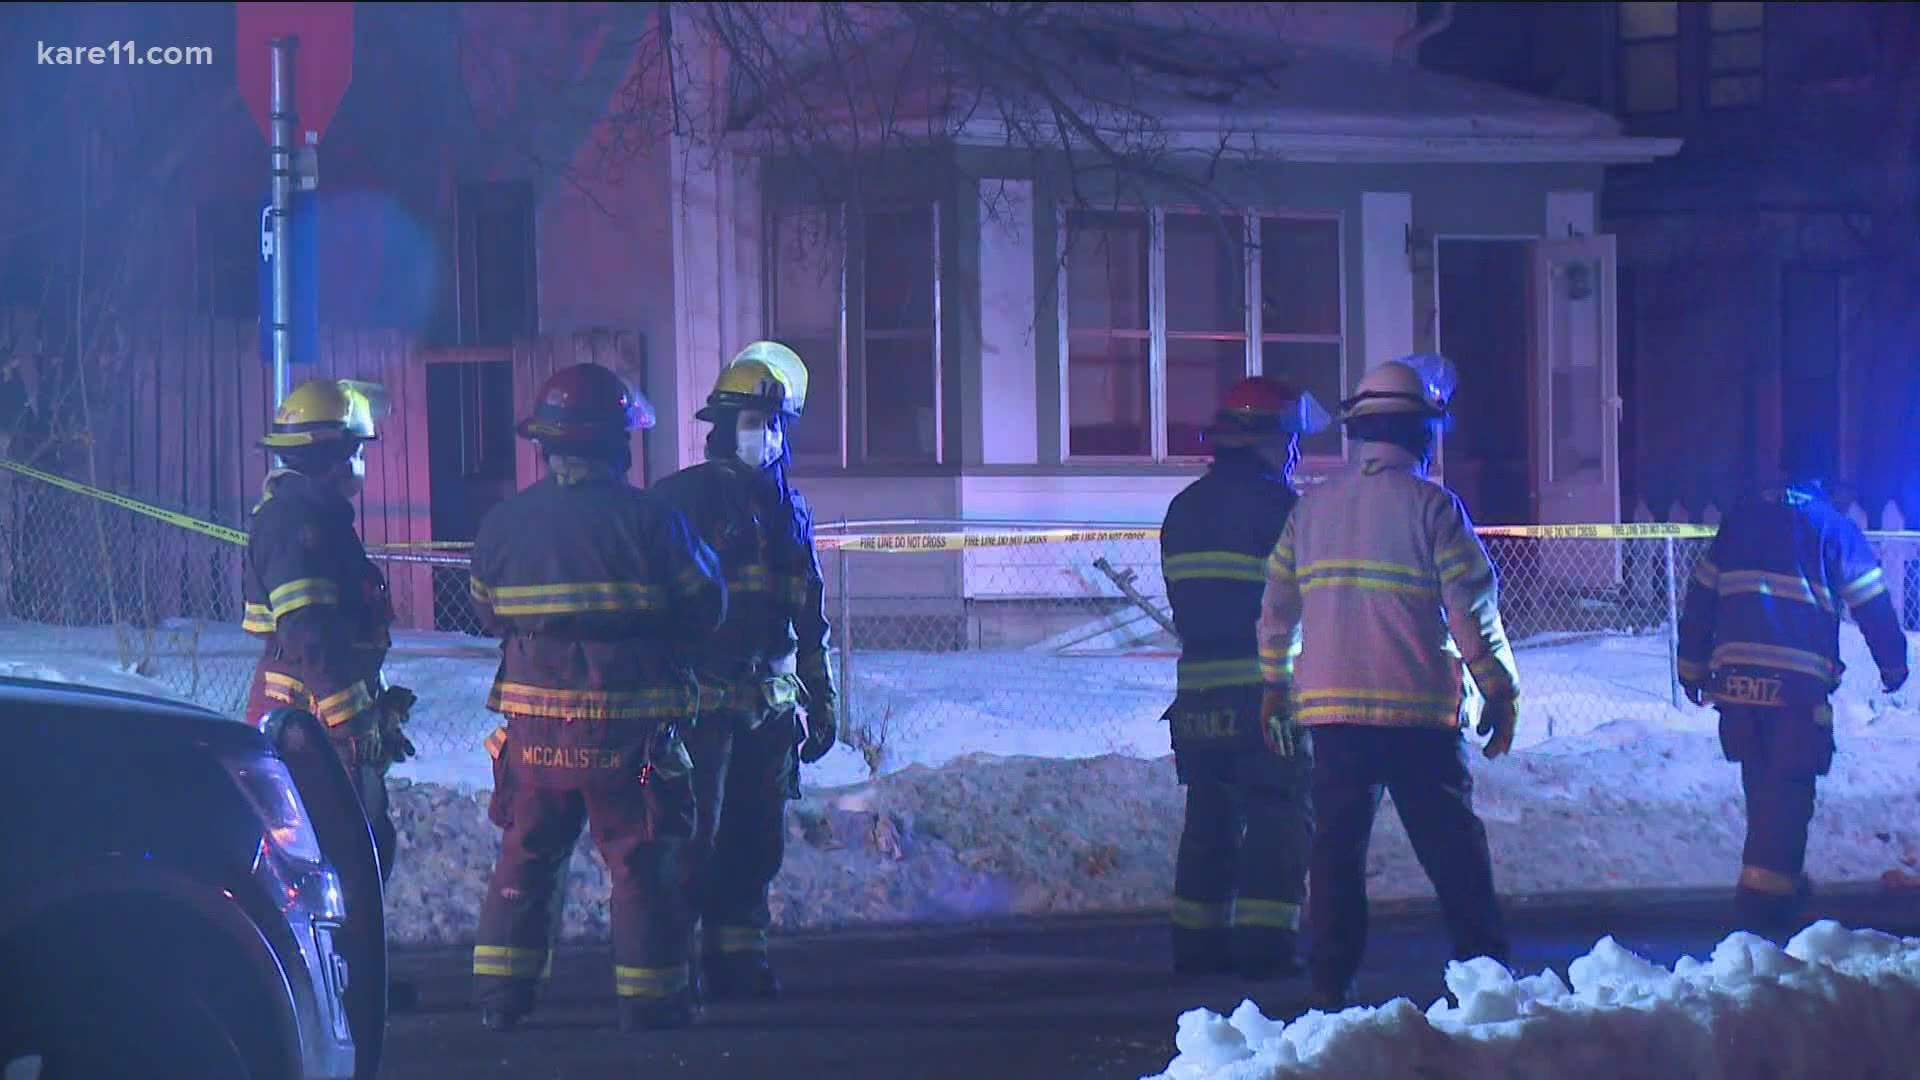 A neighbor called 911 to report the fire Tuesday night